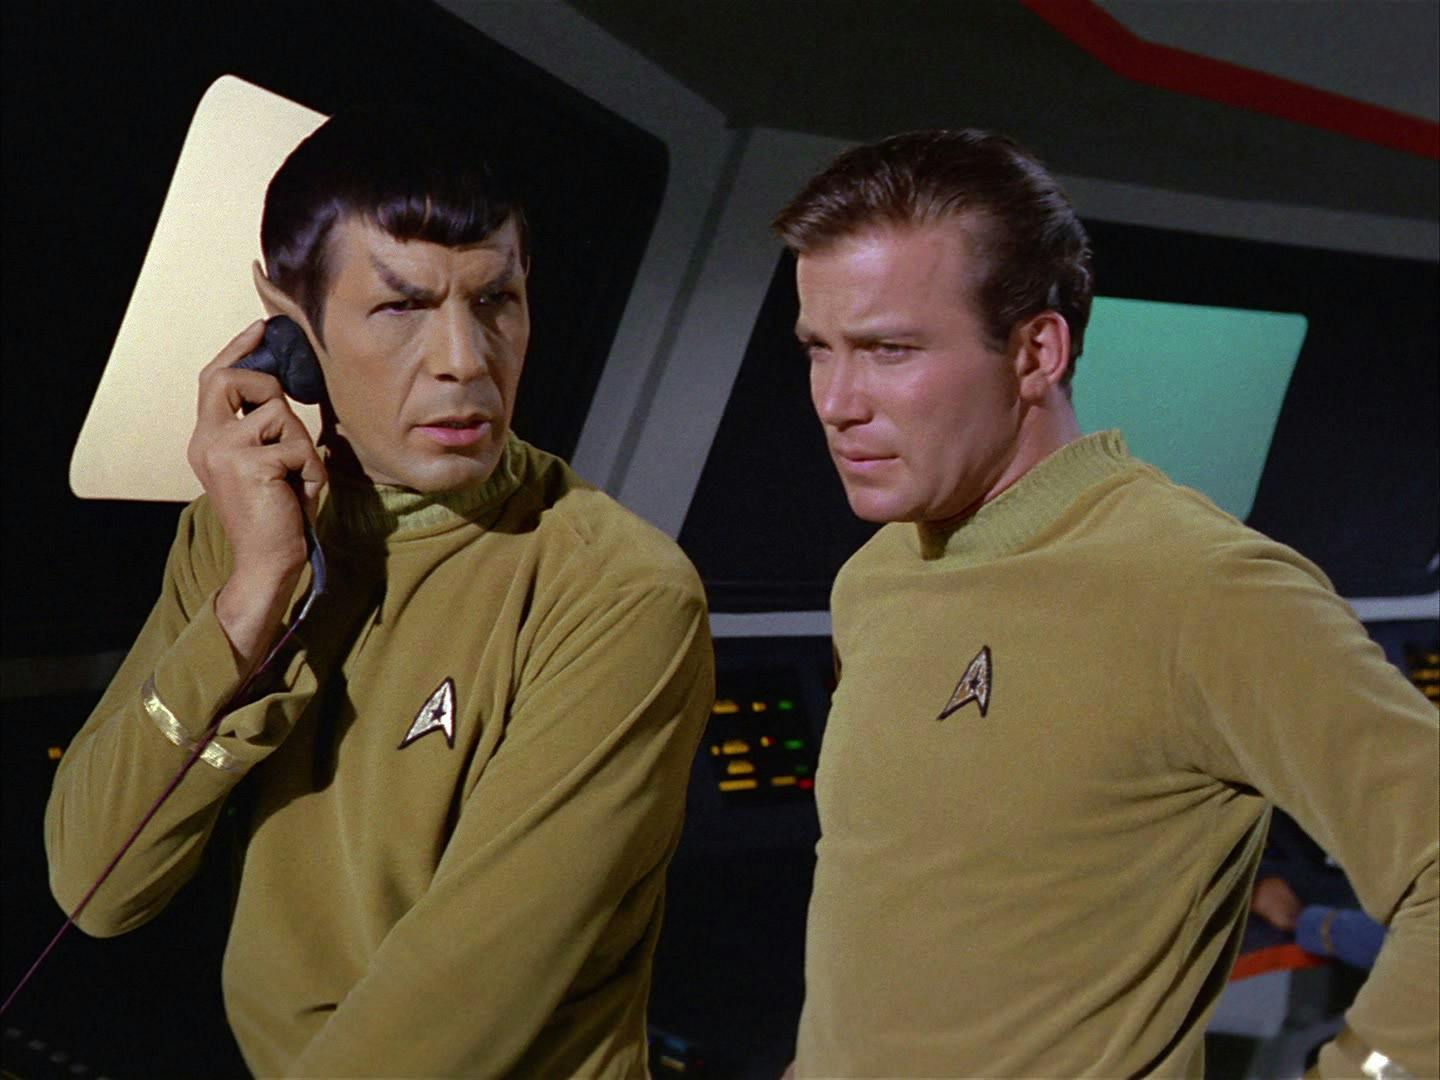 On the Bridge of the Enterprise, Spock holds a receiver to his ear as Kirk stands behind him in 'Where No Man Has Gone Before'